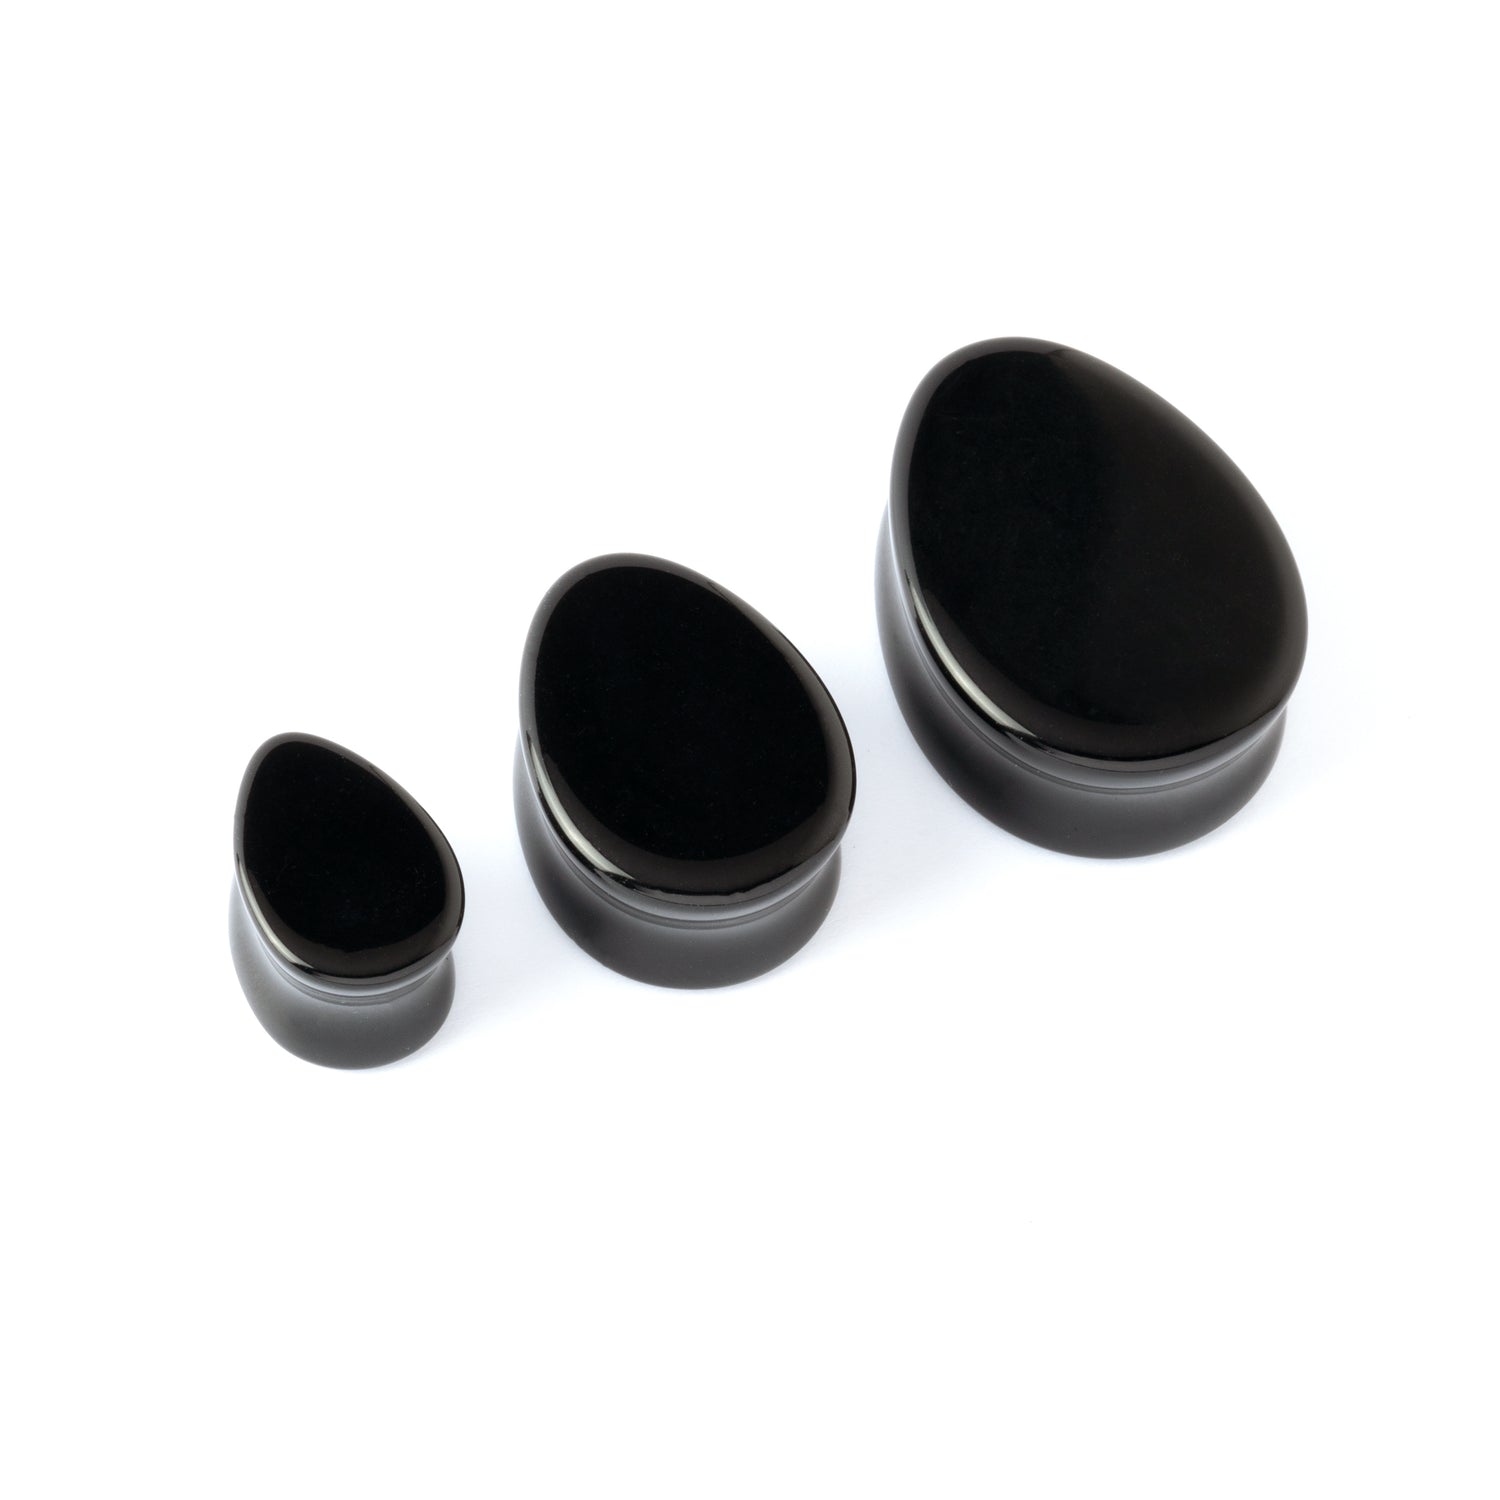 three sizes black Agate teardrop plugs with double flared ends side view